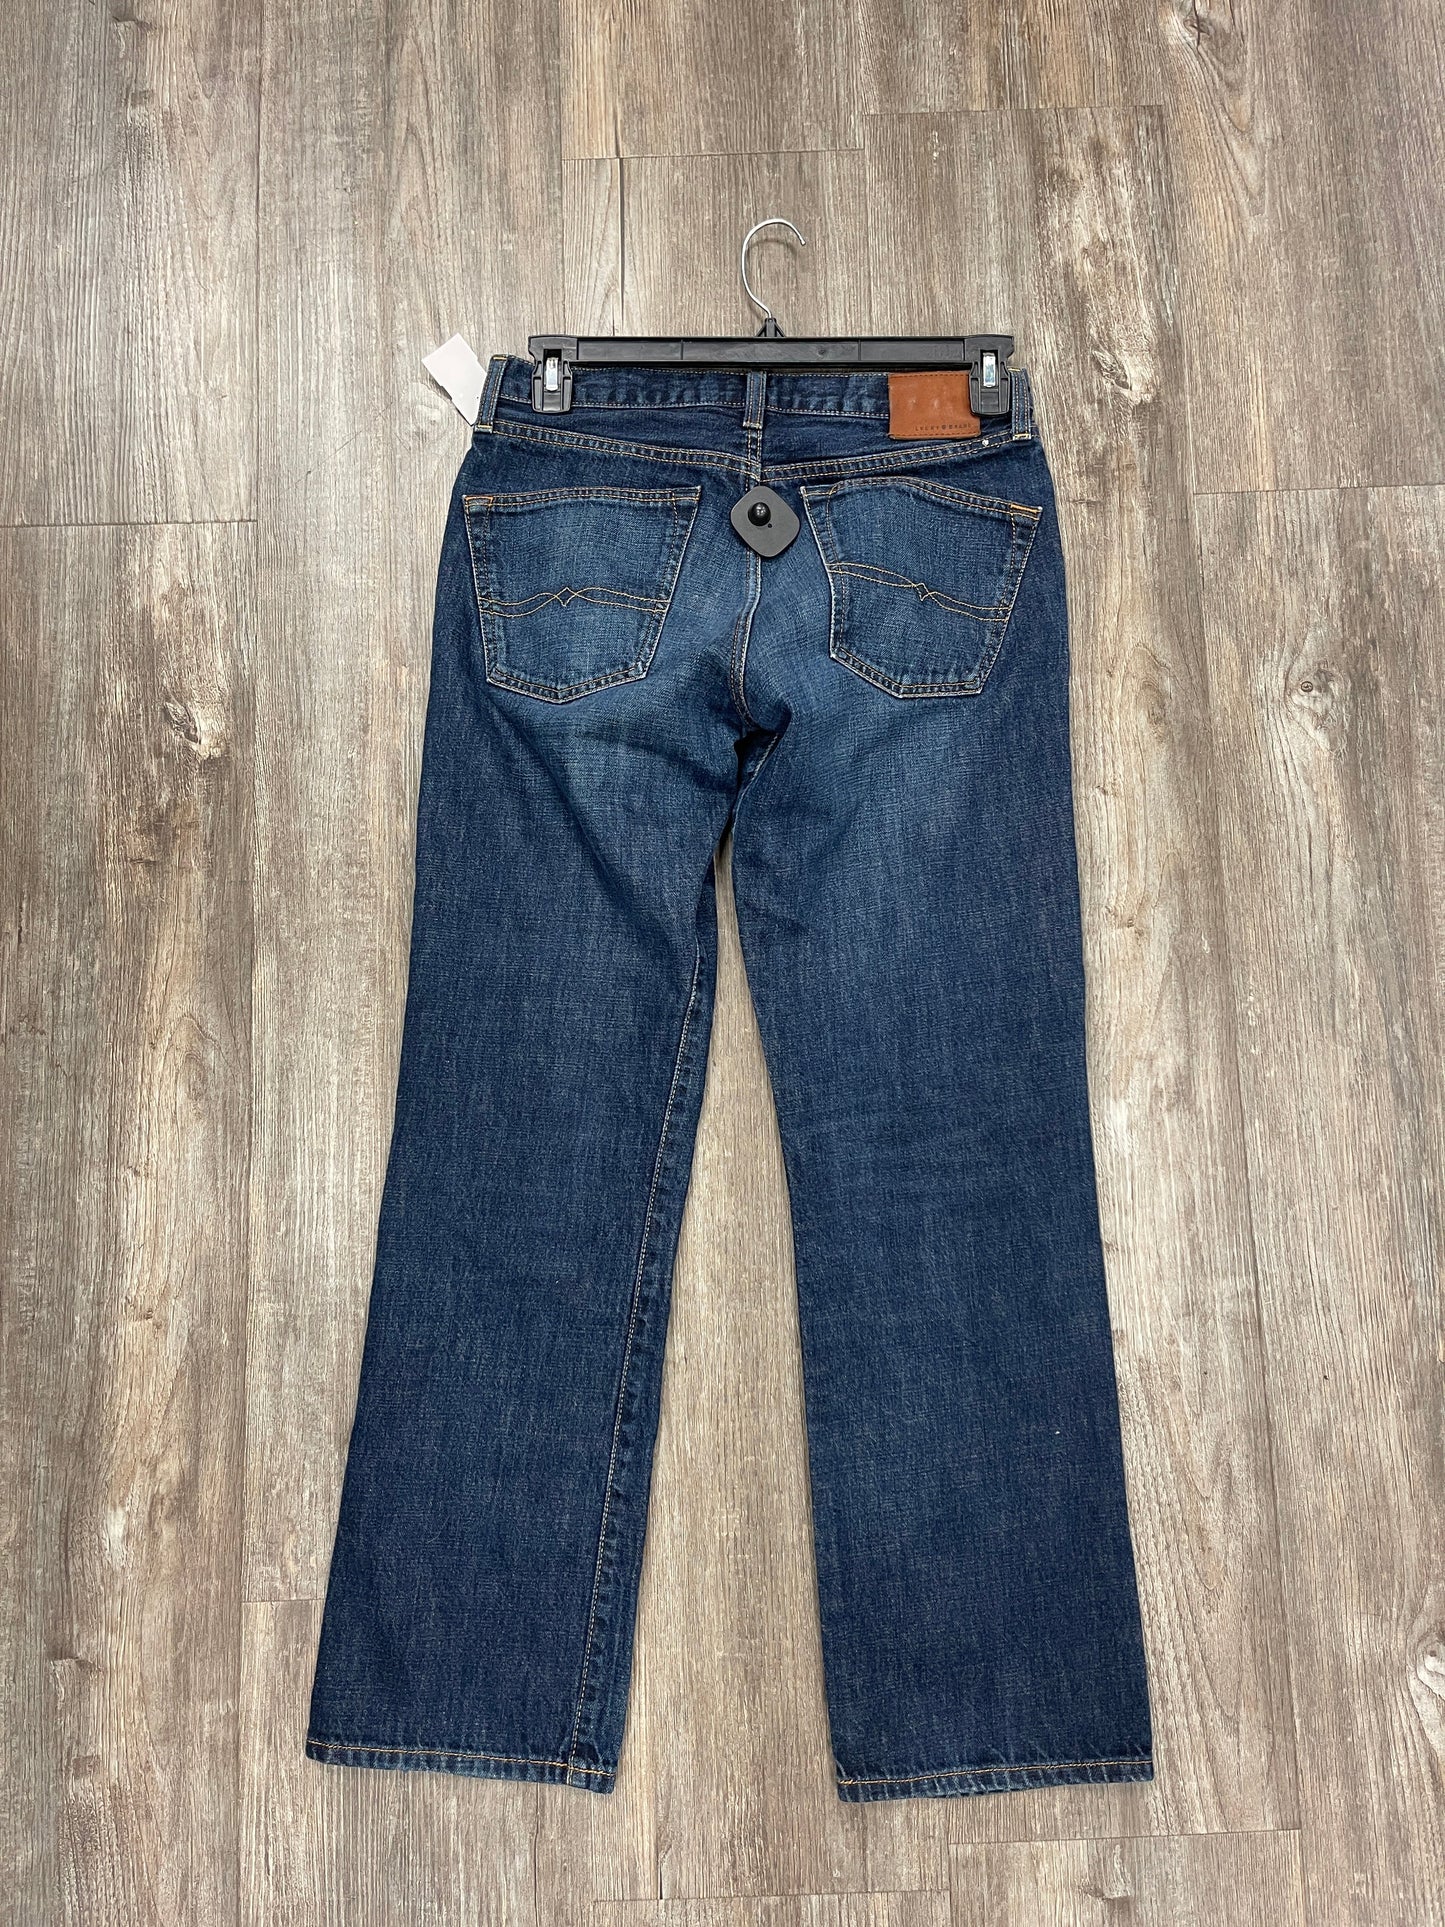 Jeans Boot Cut By Lucky Brand  Size: 10